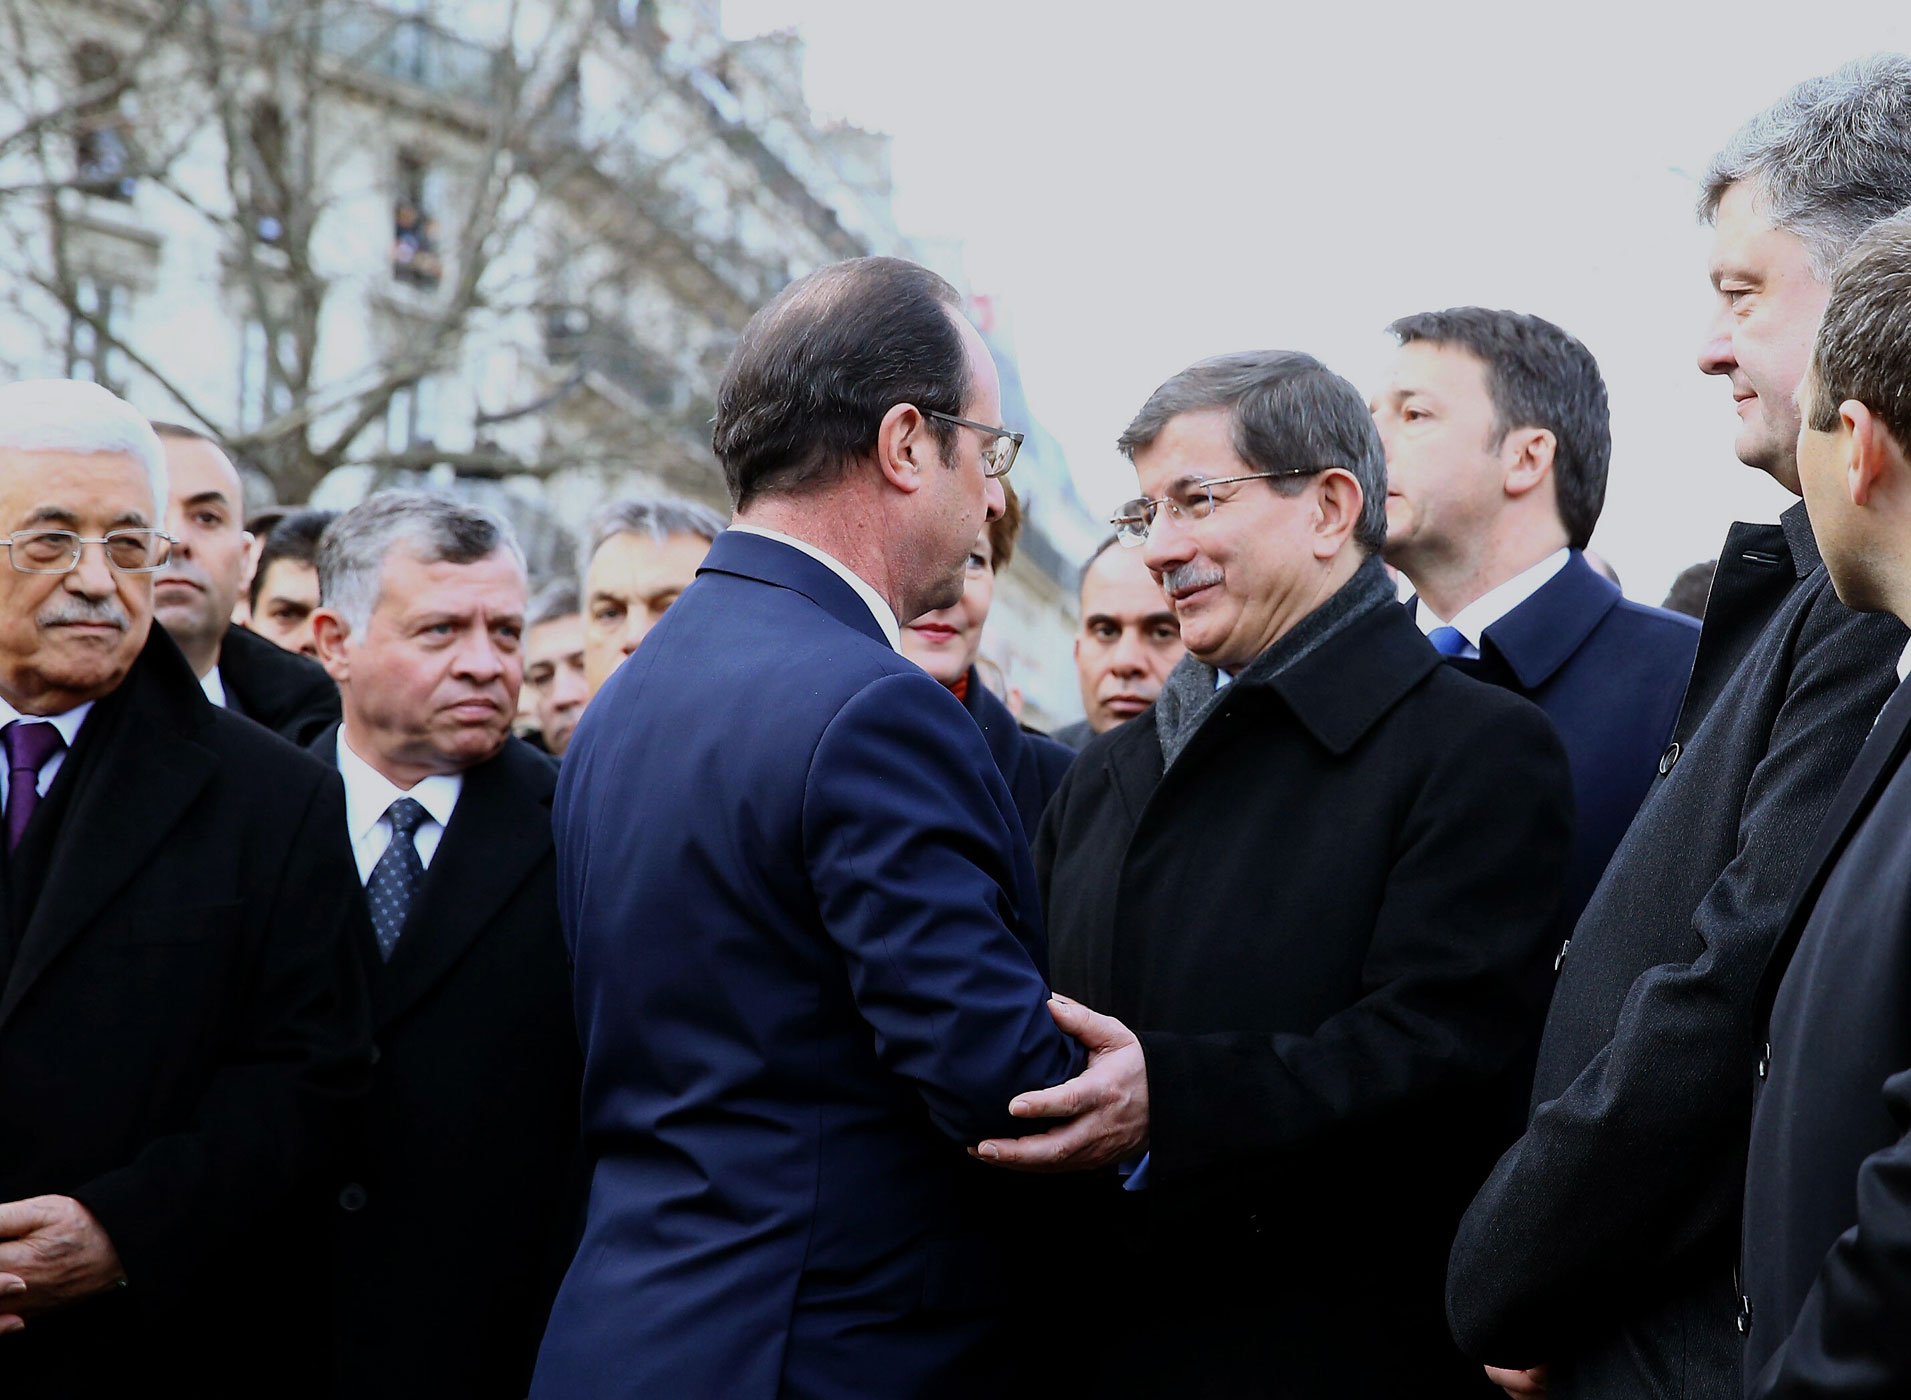 World leaders attend Unity March in Paris